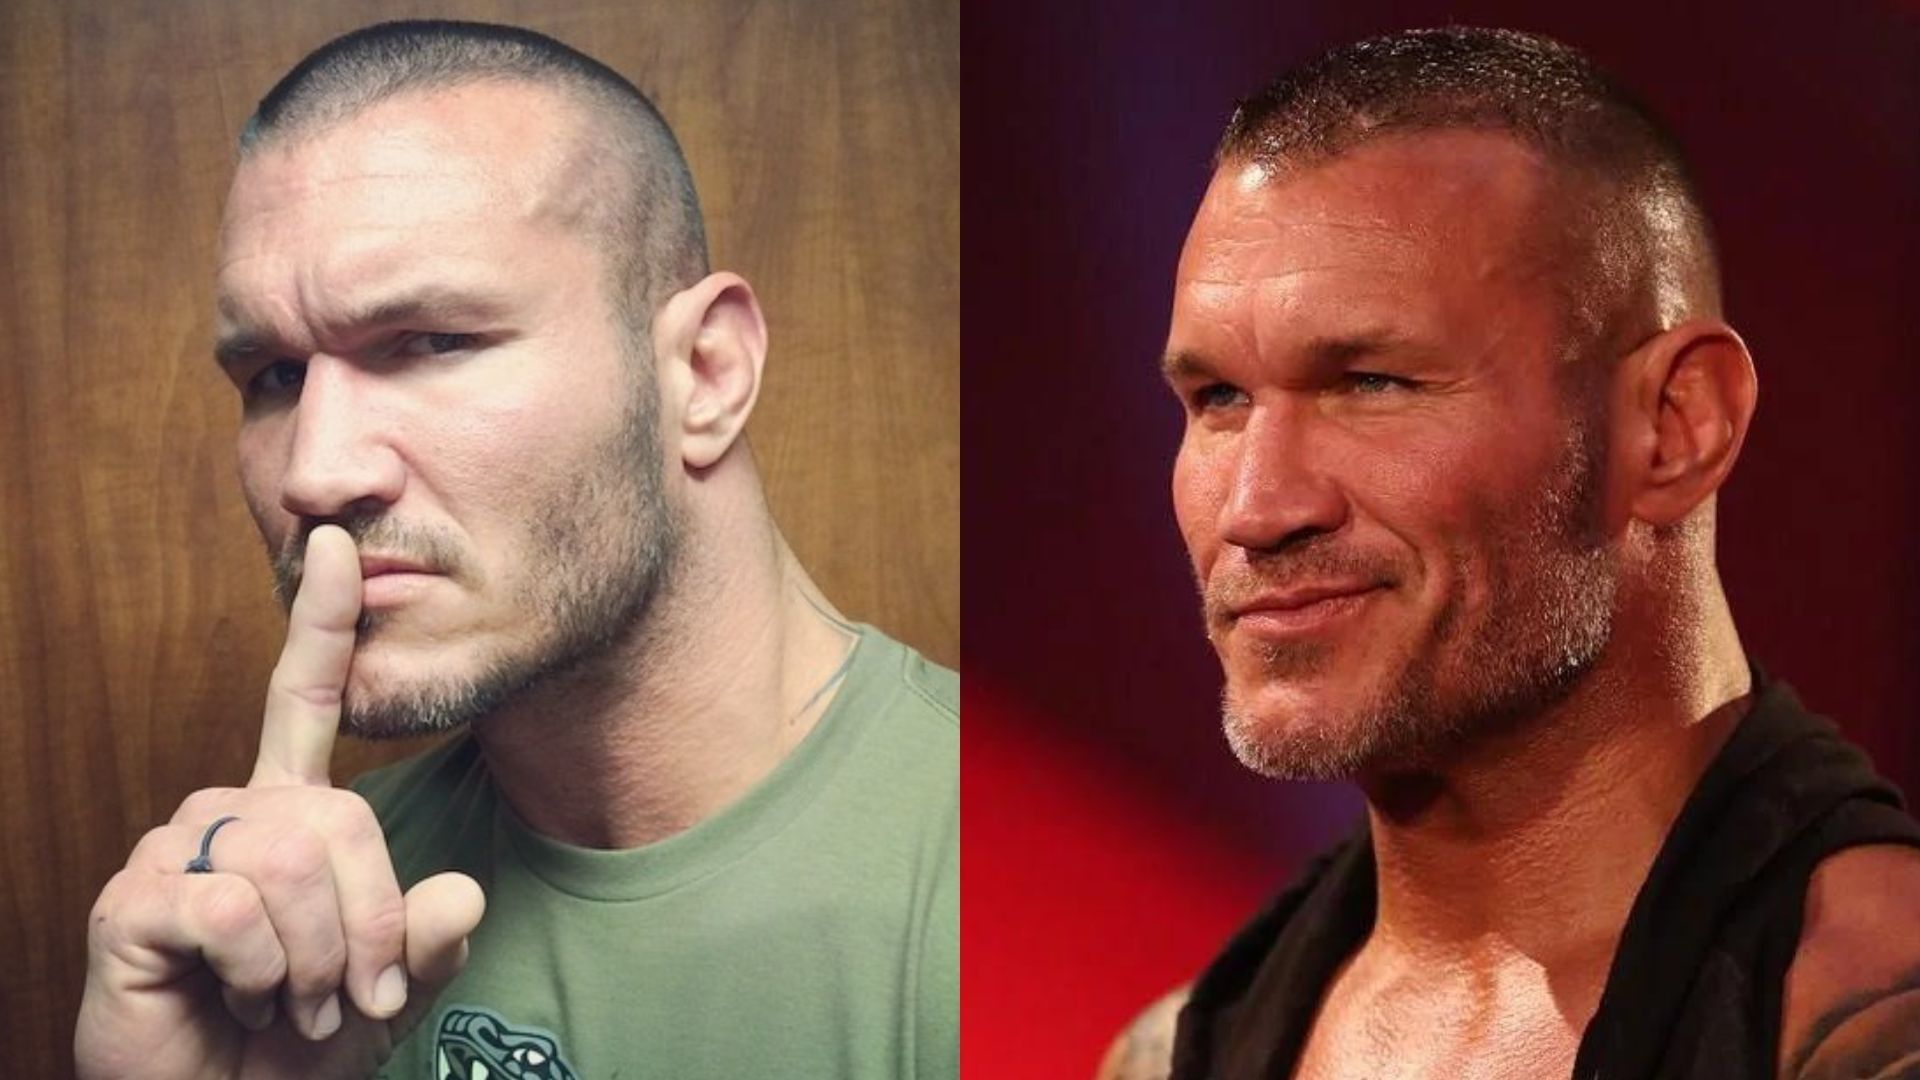 Randy Orton is currently out with an injury.